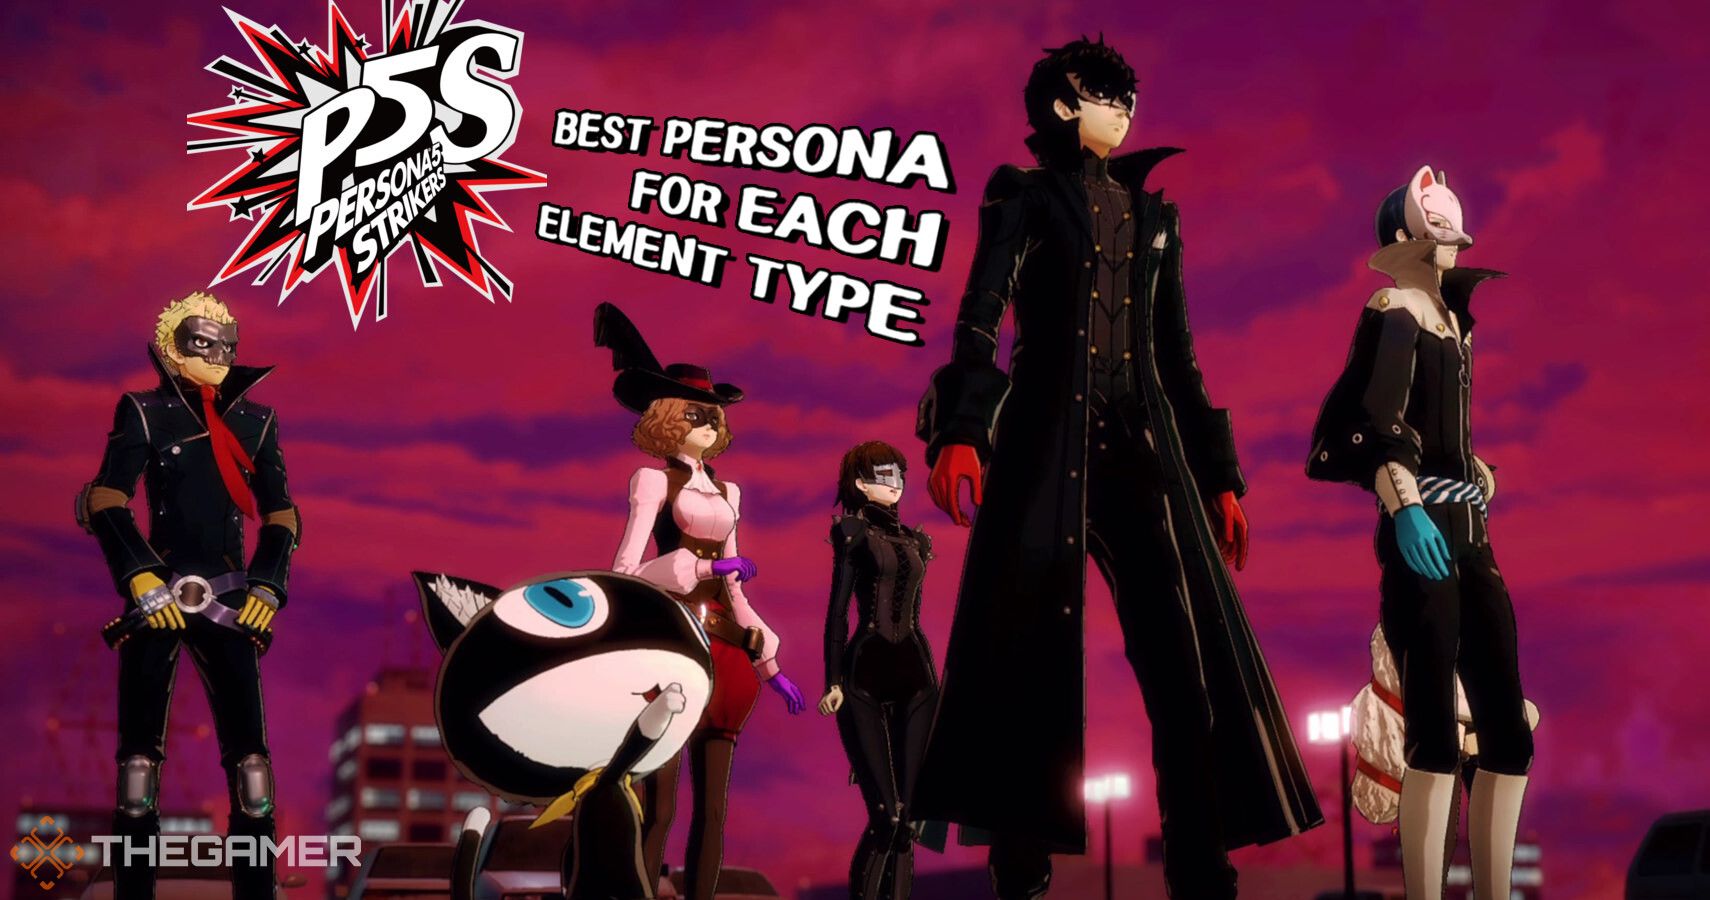 Persona 5 Strikers - Best Persona For Each Element Type